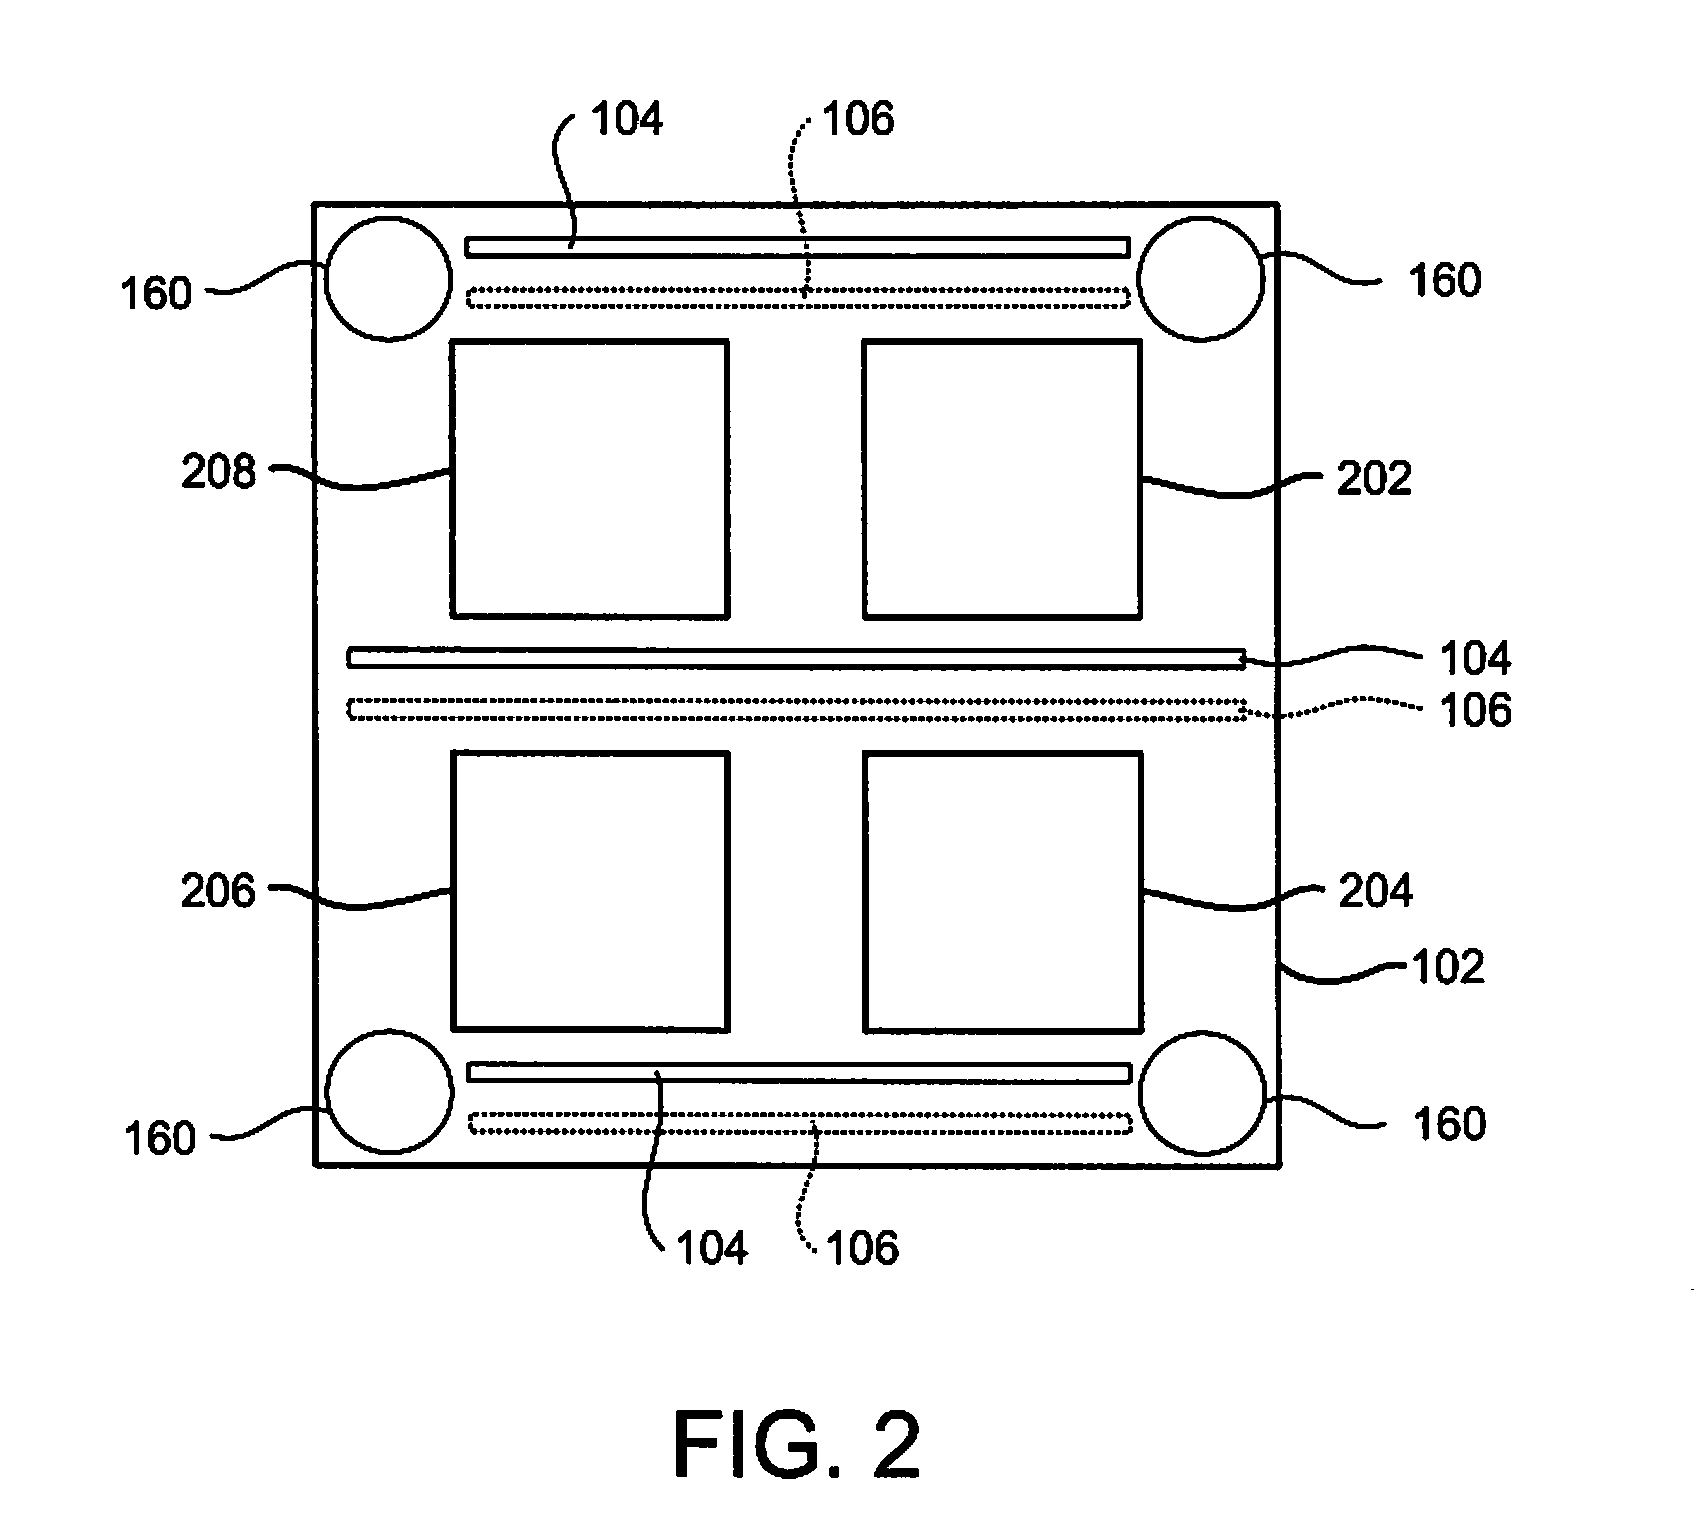 Method and Apparatus for Electrically Connecting Two Substrates Using a Land Grid Array Connector Provided with a Frame Structure Having Power Distribution Elements